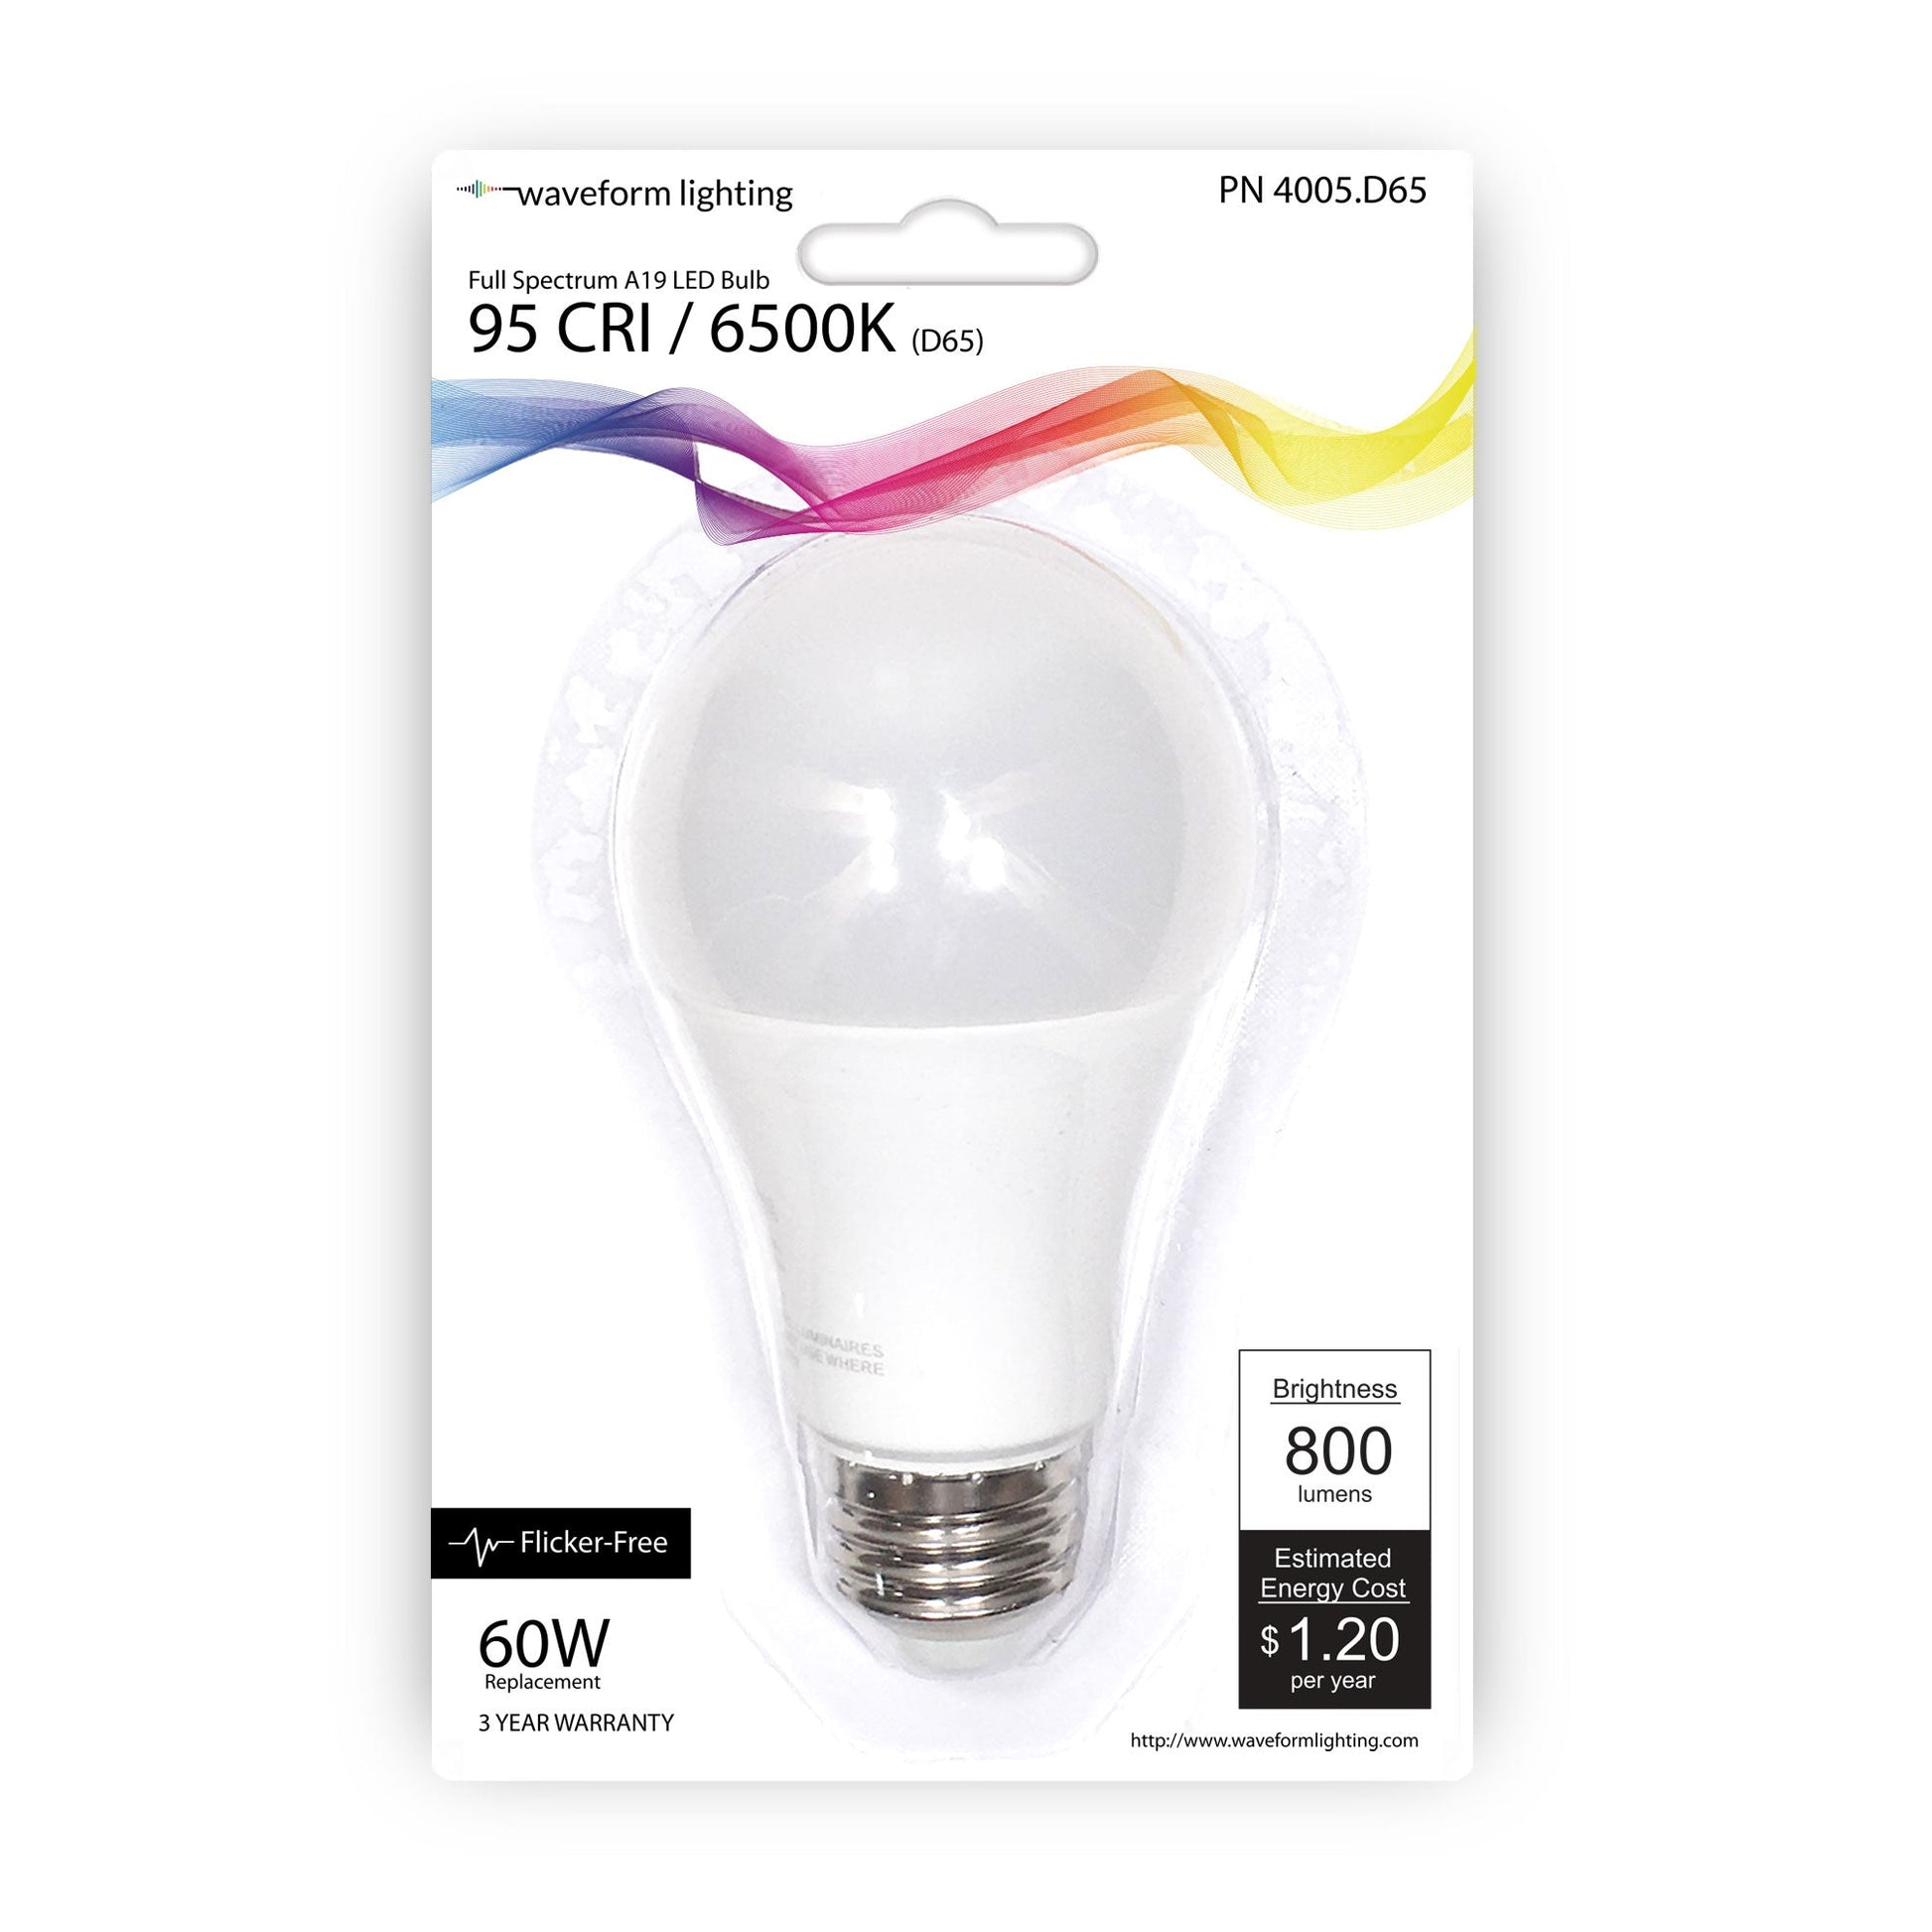 E27 LED bulb - CLASSIC, dimmable 7W, CRI95, 4000K - High-quality lighting  for your home!